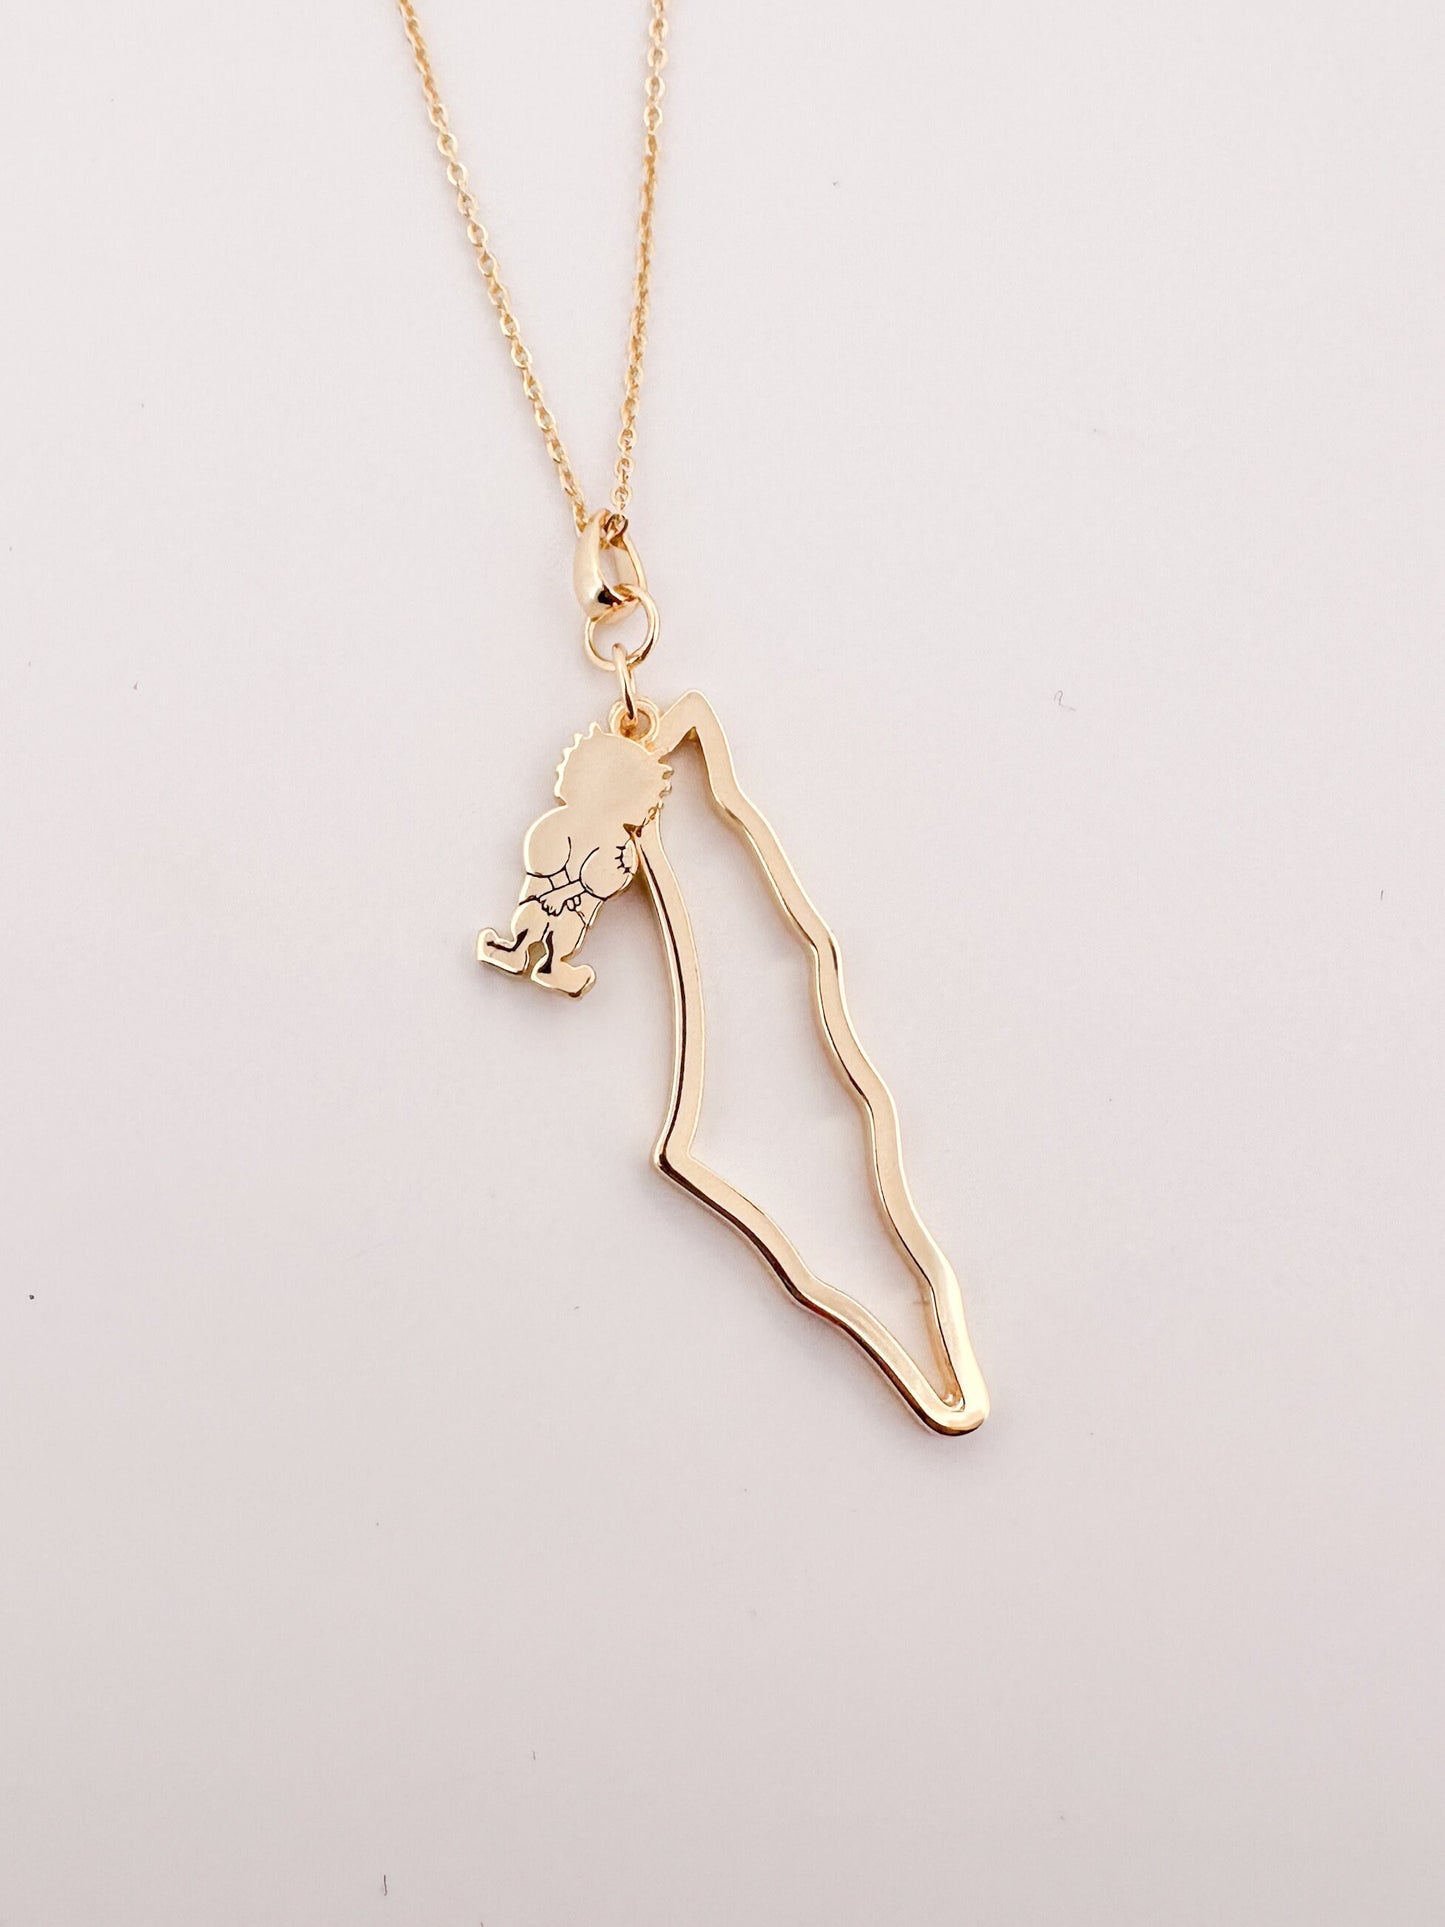 Palestine Map with Handala Charm Necklace